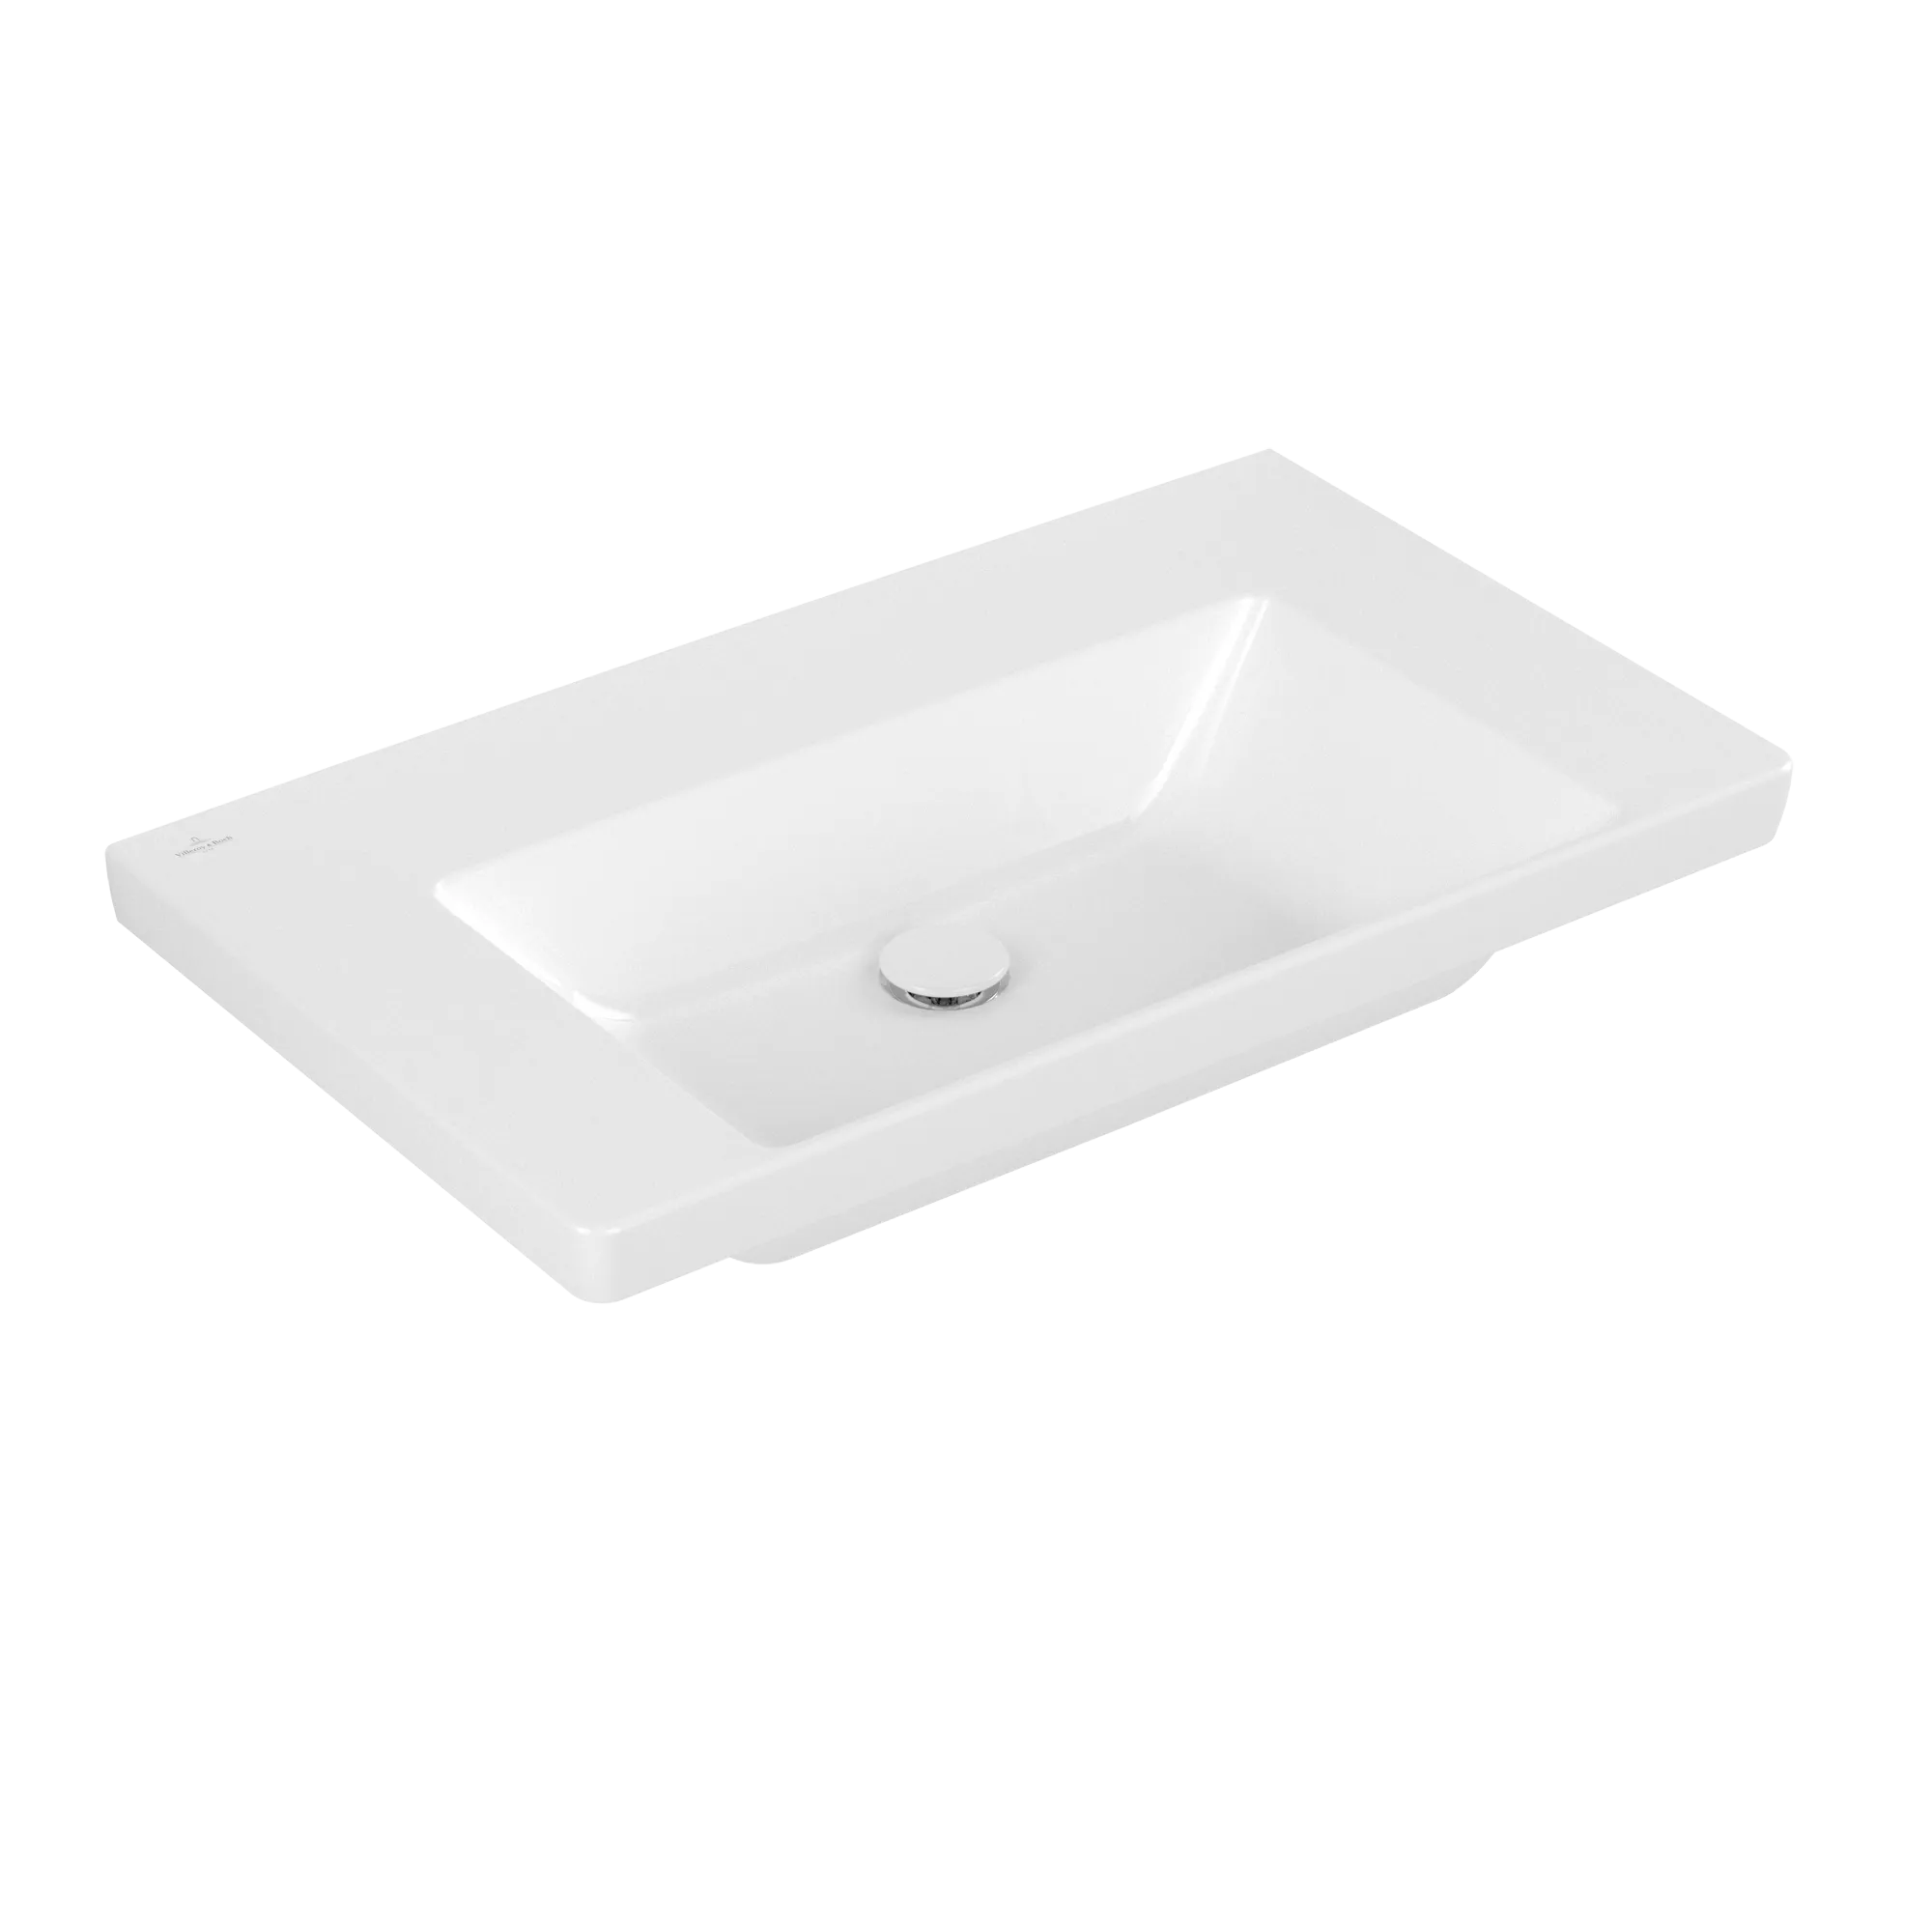 Picture of VILLEROY BOCH Subway 3.0 Vanity washbasin, 800 x 470 x 165 mm, White Alpin, without overflow #4A708301